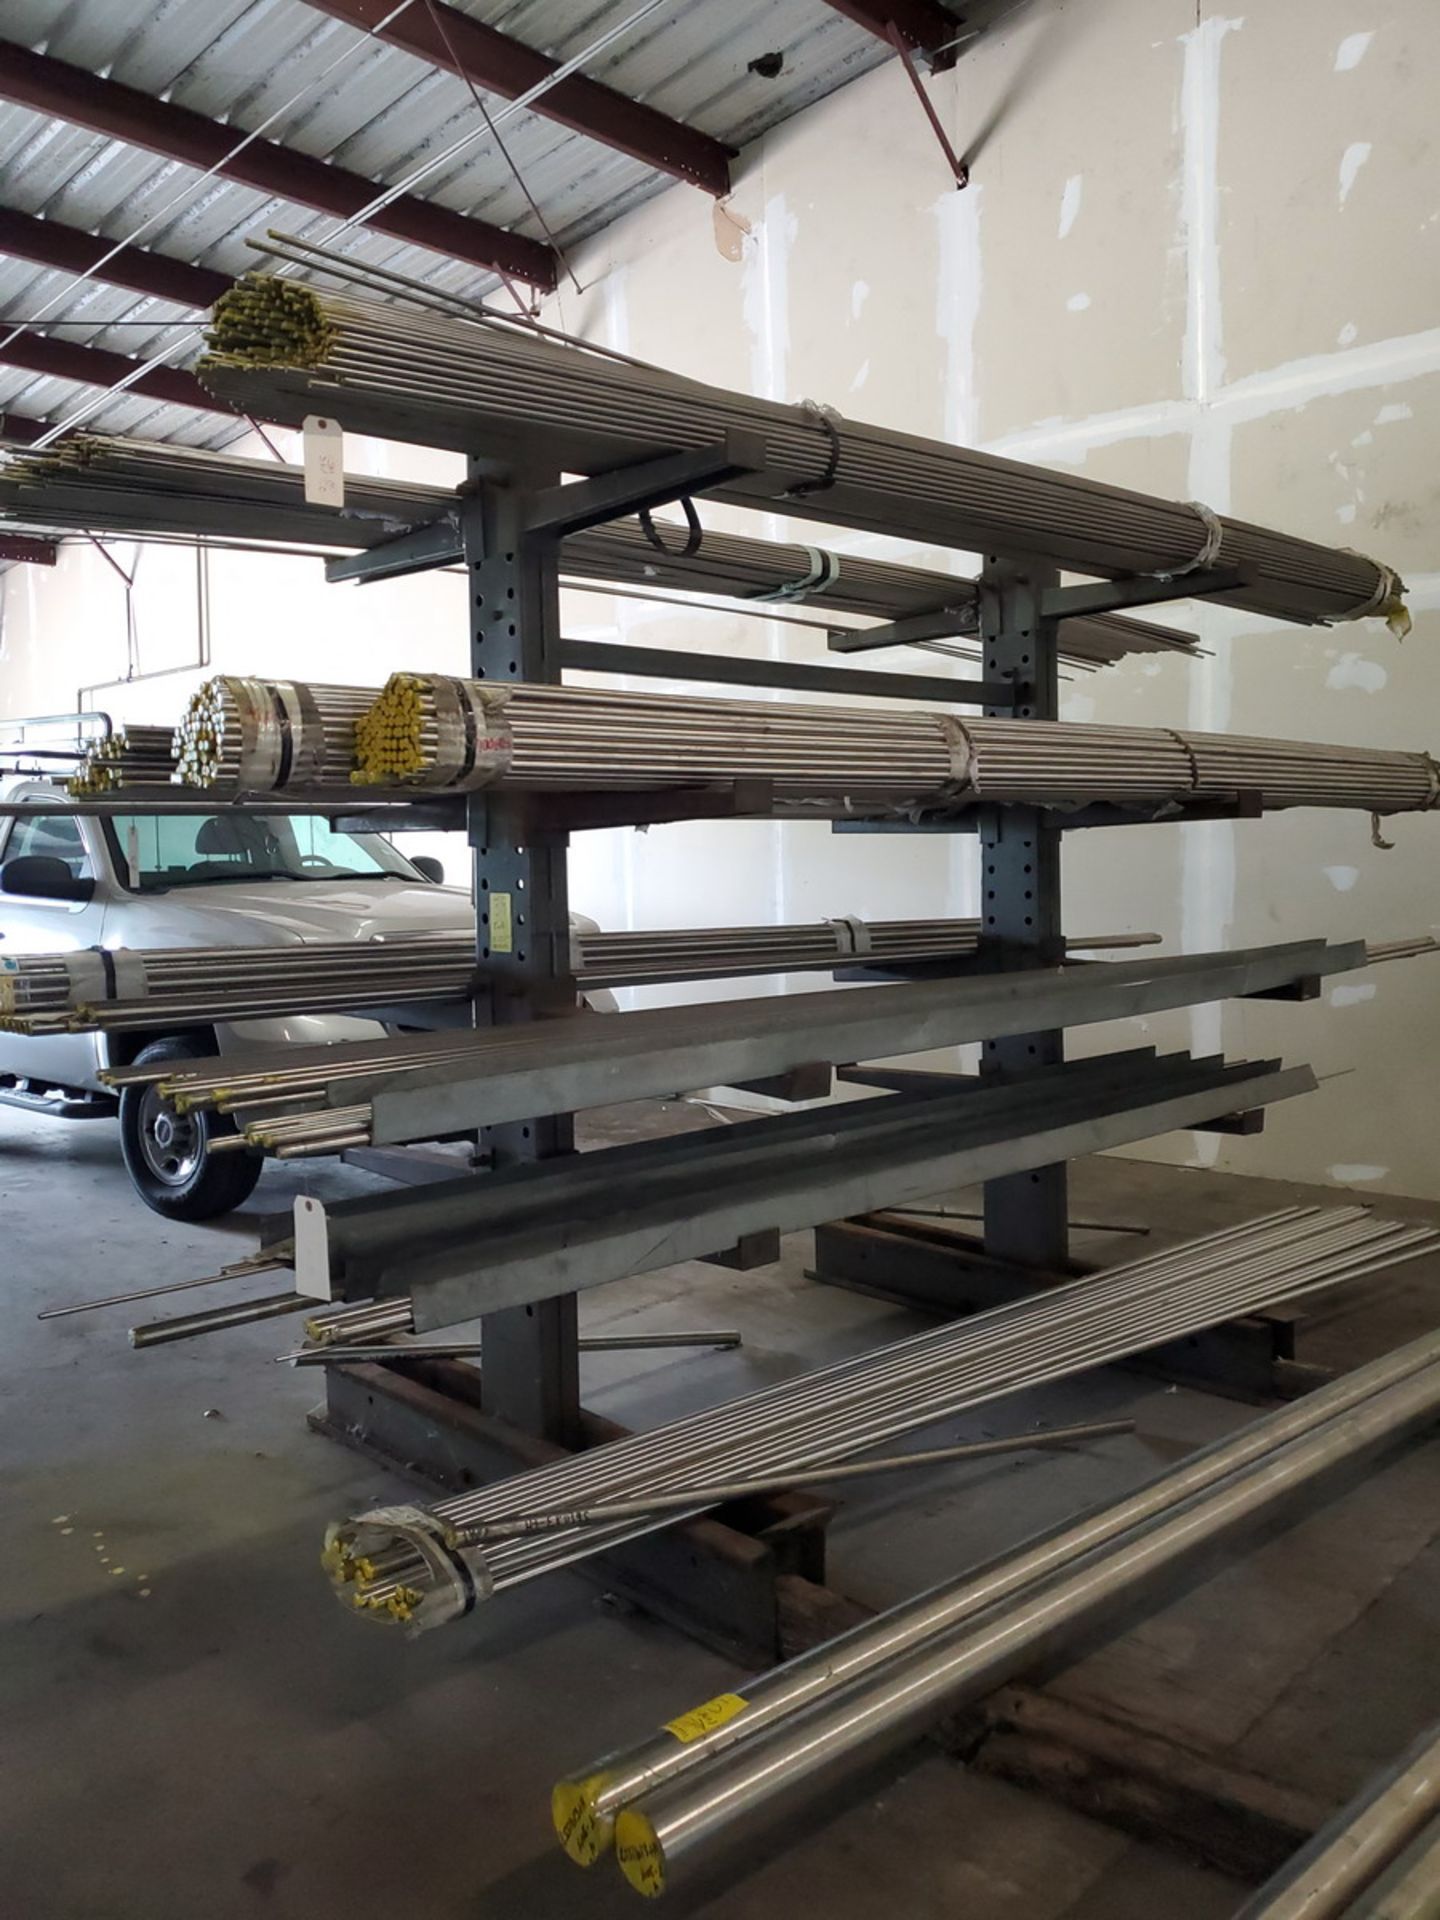 Double-Sided Cantilever Rack 77" x 64" x 96", 2' Deep (Matl. Excluded) - Image 3 of 3